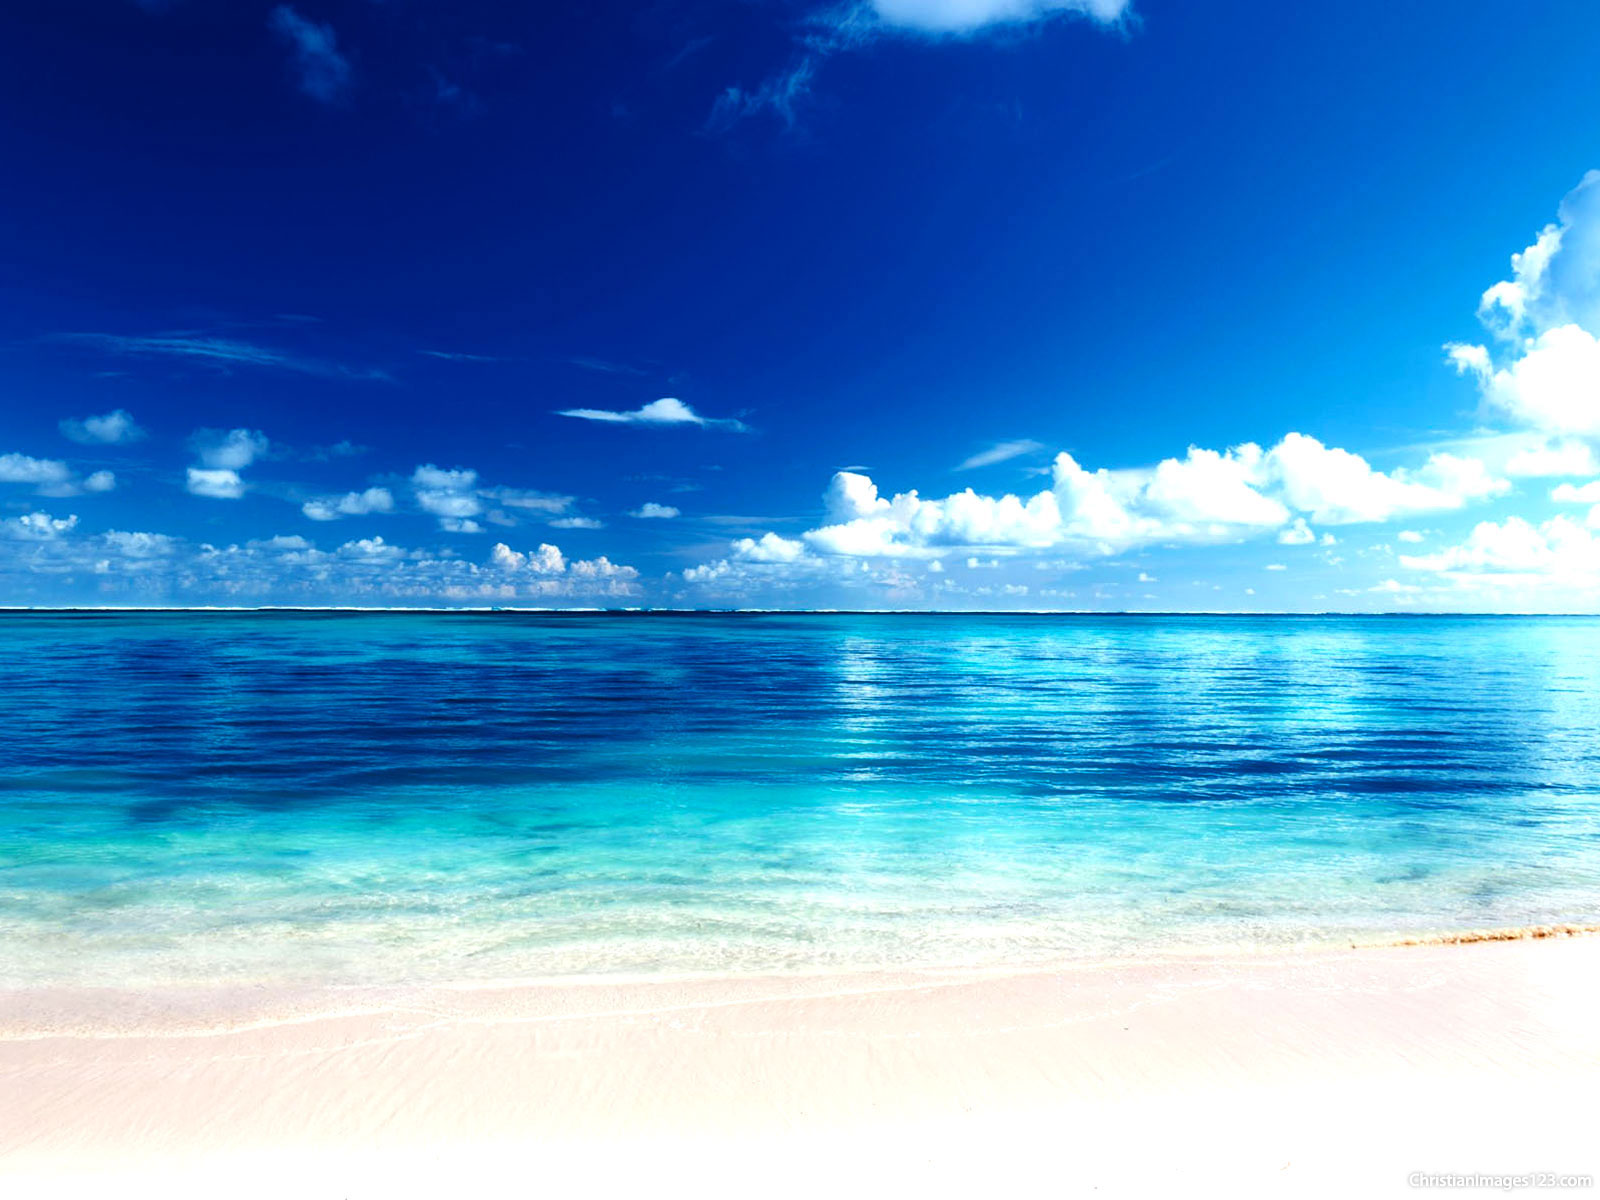 Awesome Beach Background for Powerpoint – Free Christian Images